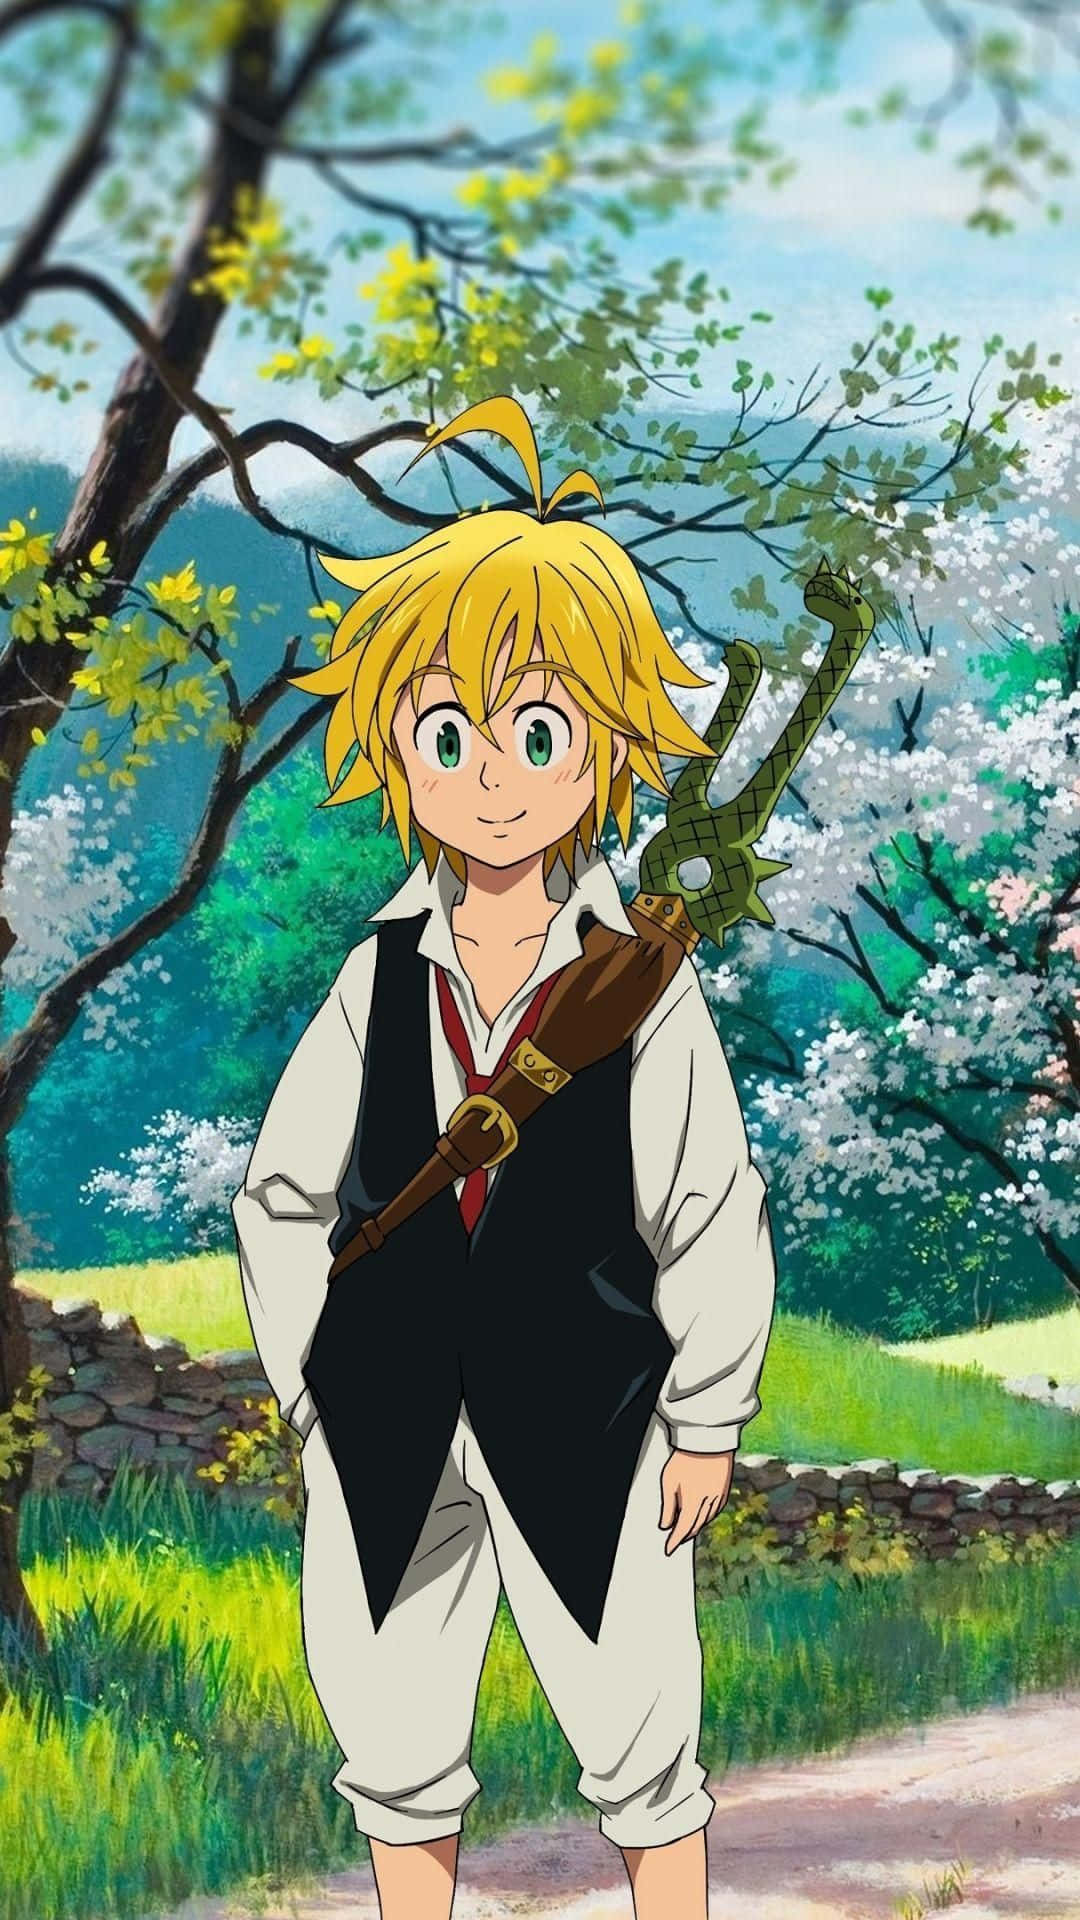 A Young Boy With Blonde Hair Standing In A Field Wallpaper